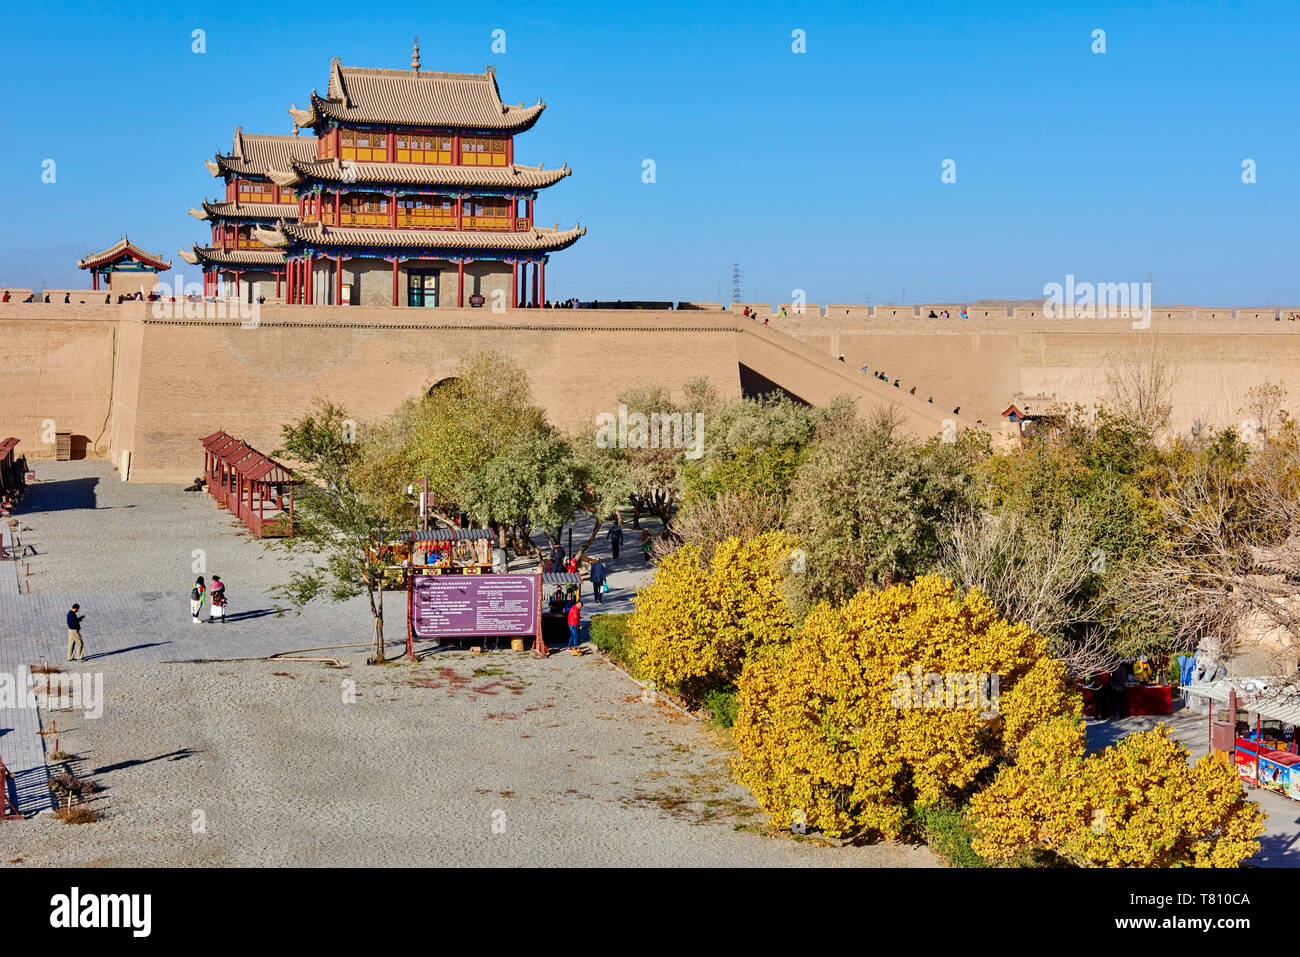 The fortress at the western end of the Great Wall, UNESCO World Heritage Site, Jiayuguan, Gansu Province, China, Asia Stock Photo